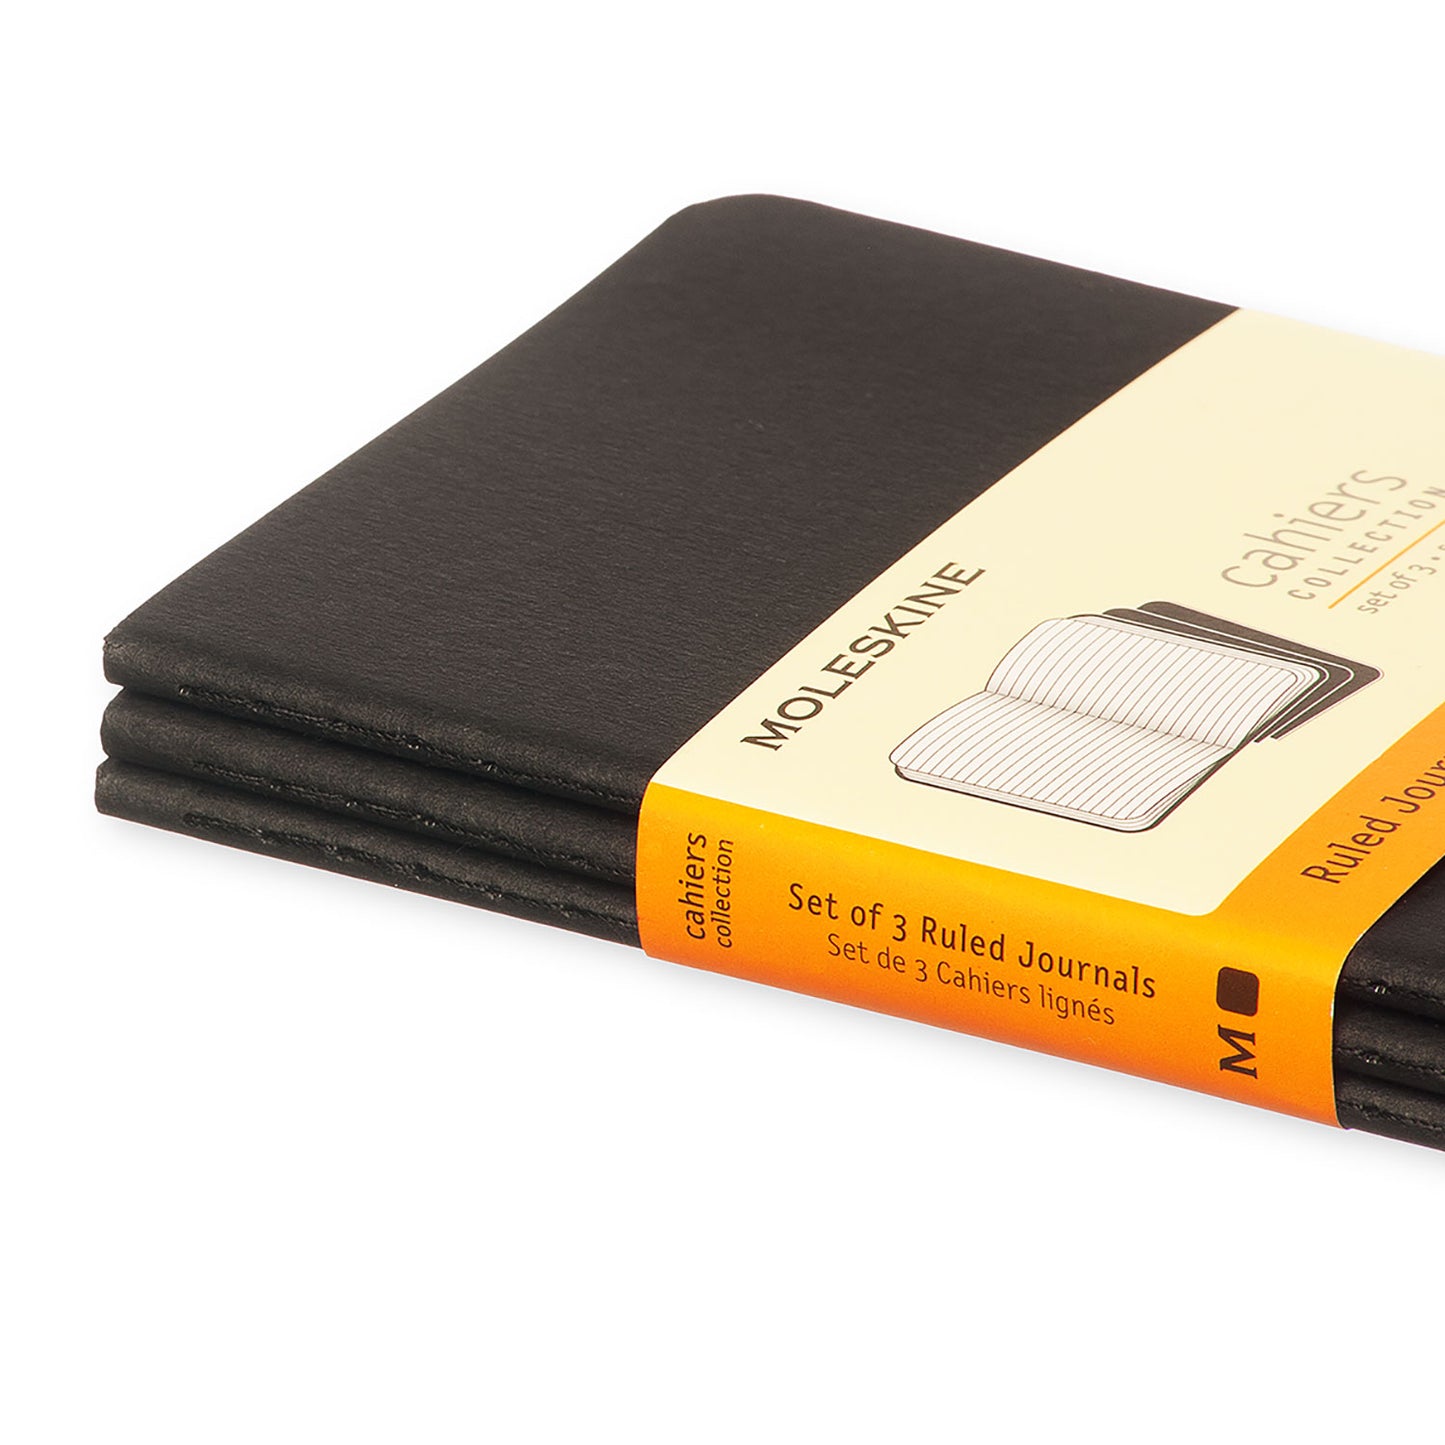 Classic Notebook - Expanded Version - Black